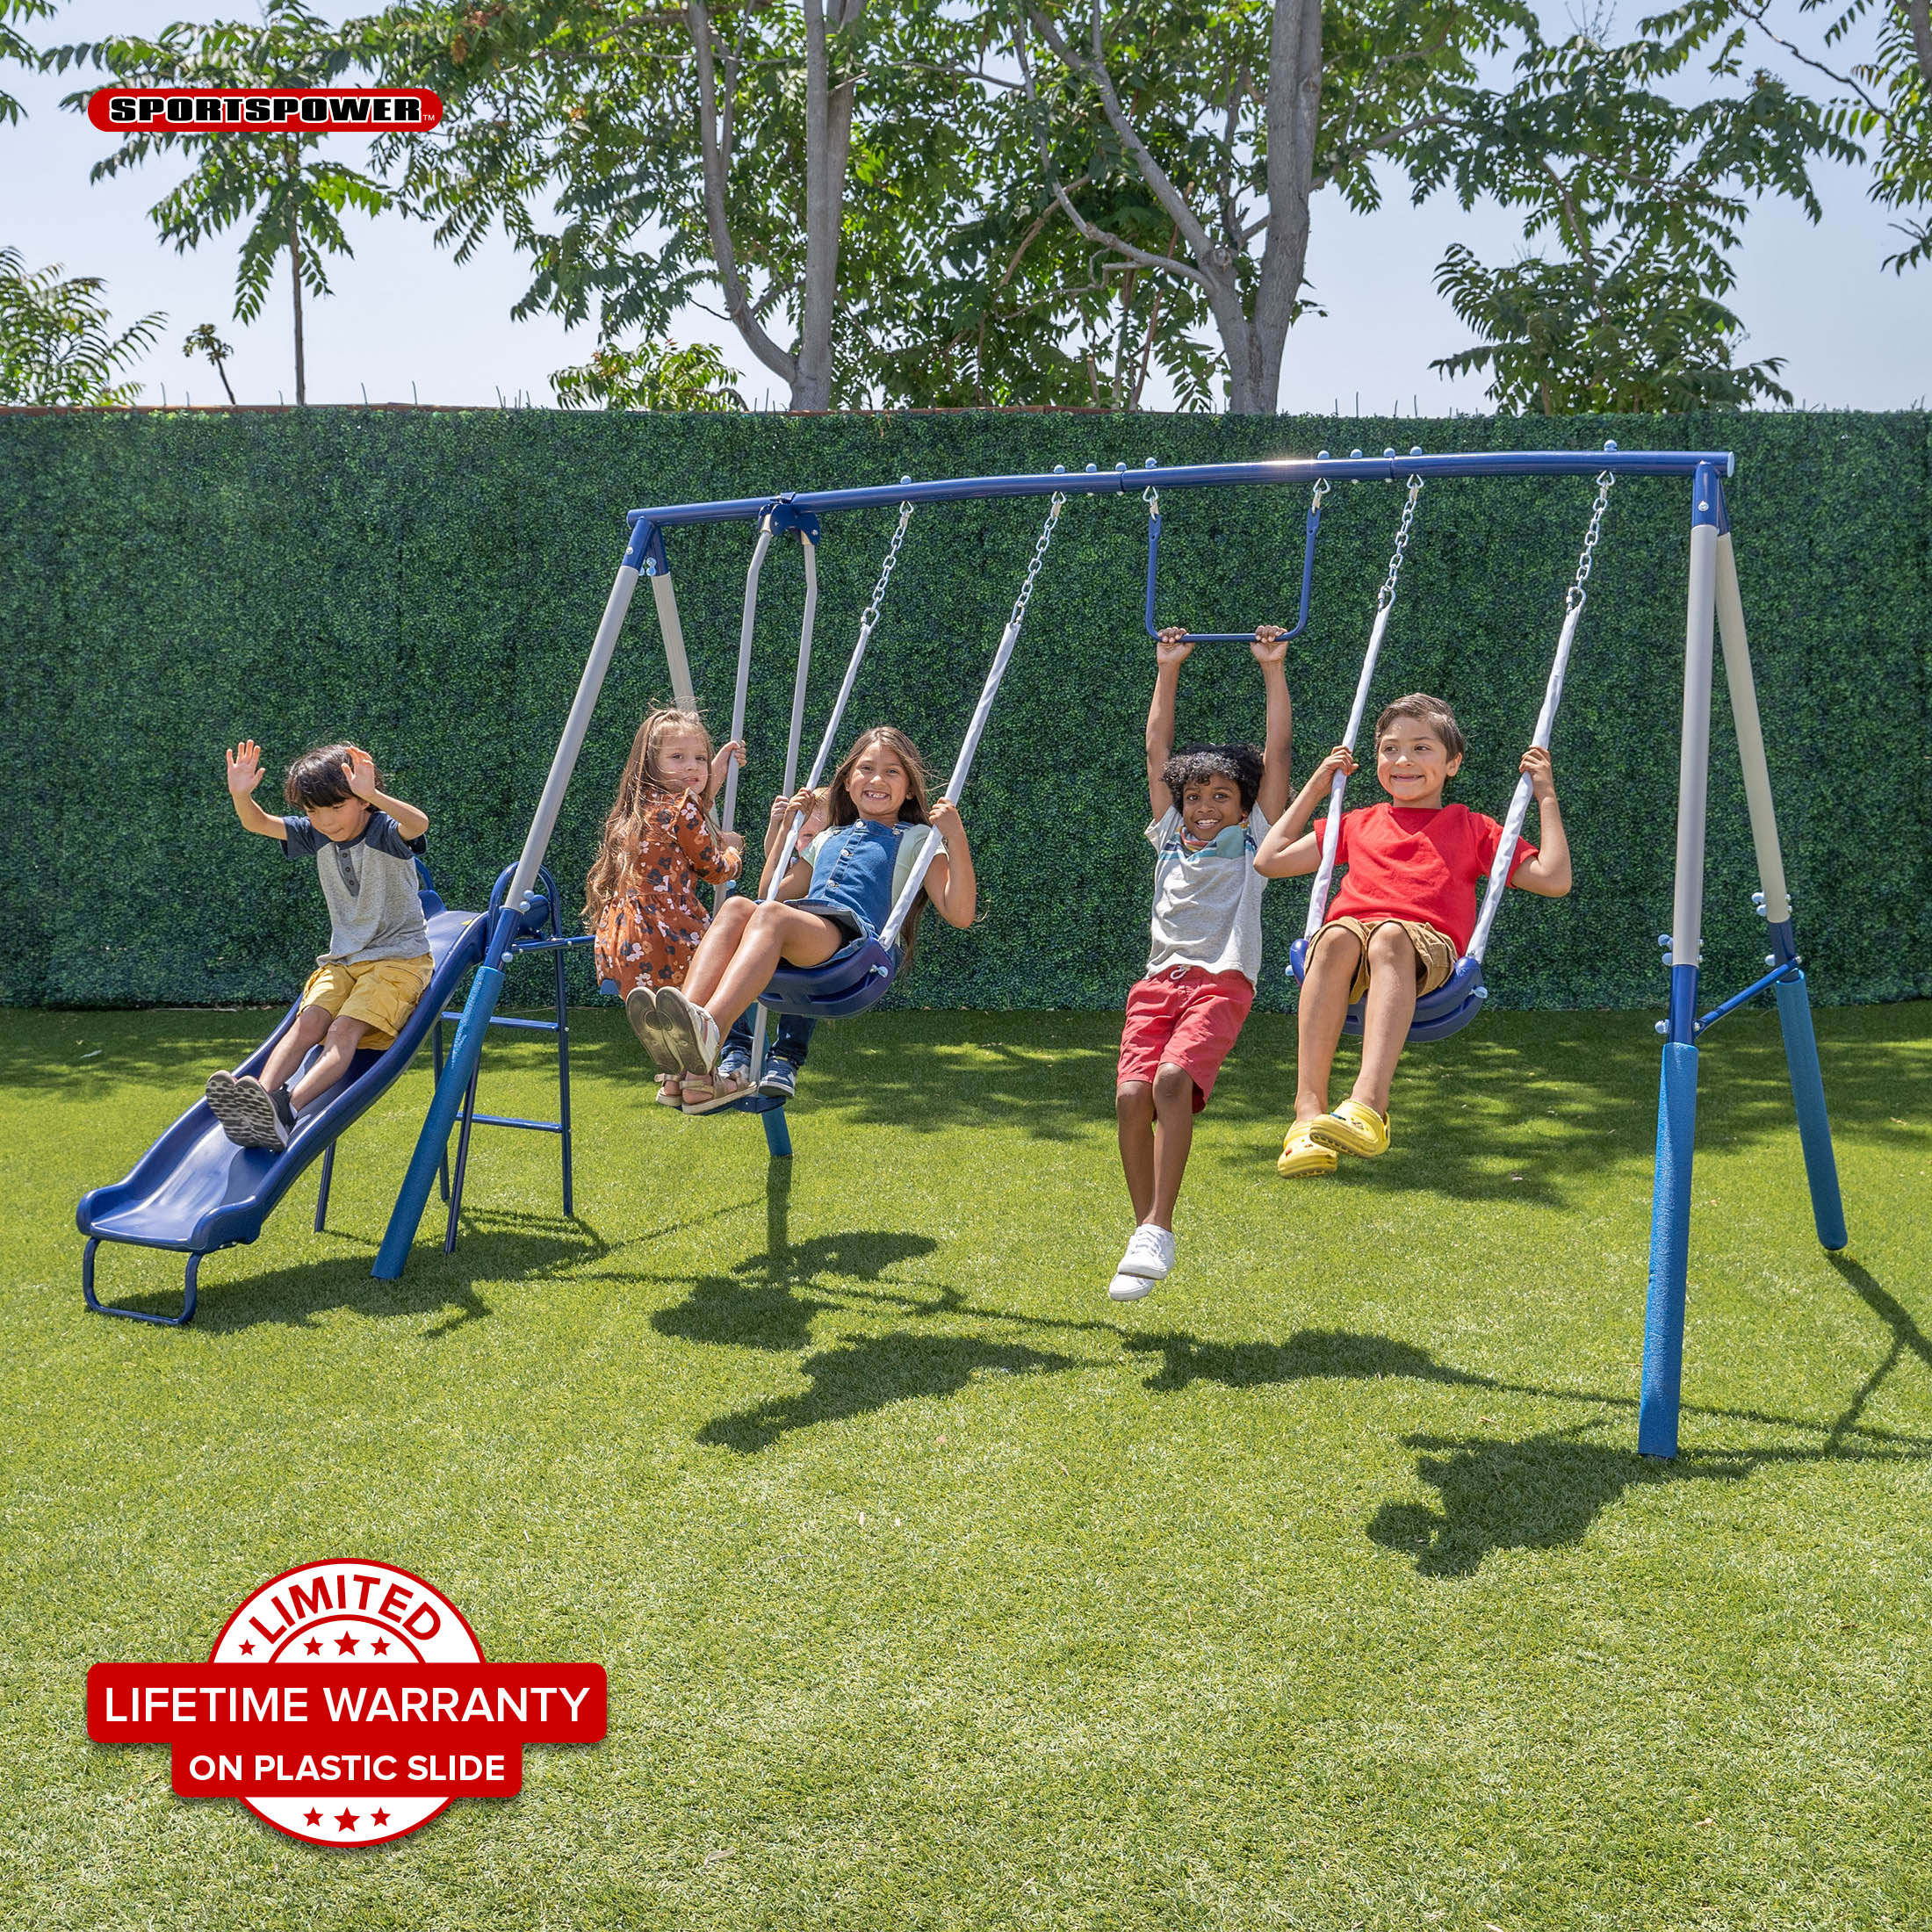 Sportspower Arcadia Metal Swing Set with Trapeze, 2 Person Glider Swing, and Lifetime Warranty on Blow Molded Slide - image 1 of 11